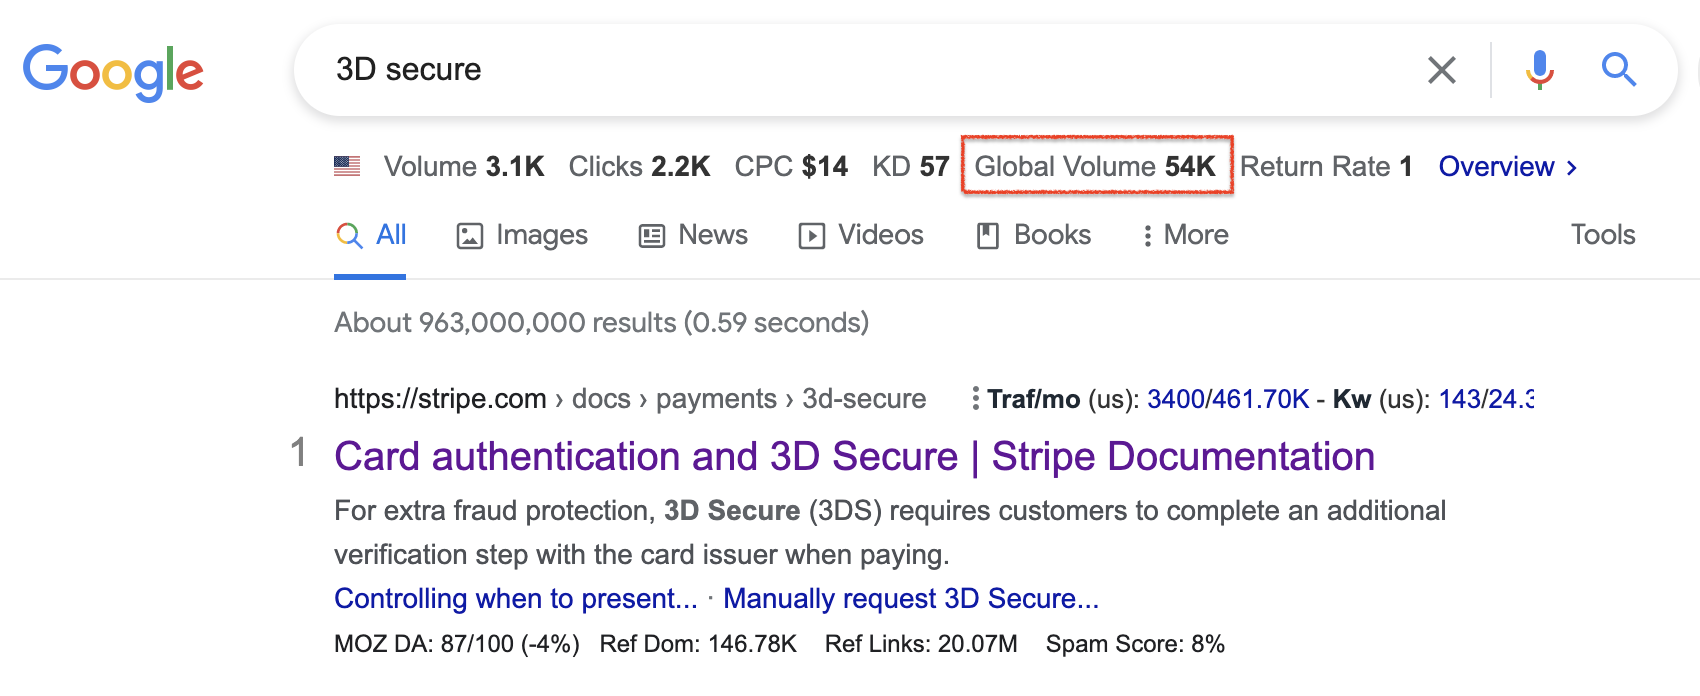 Google search top result for '3D Secure'